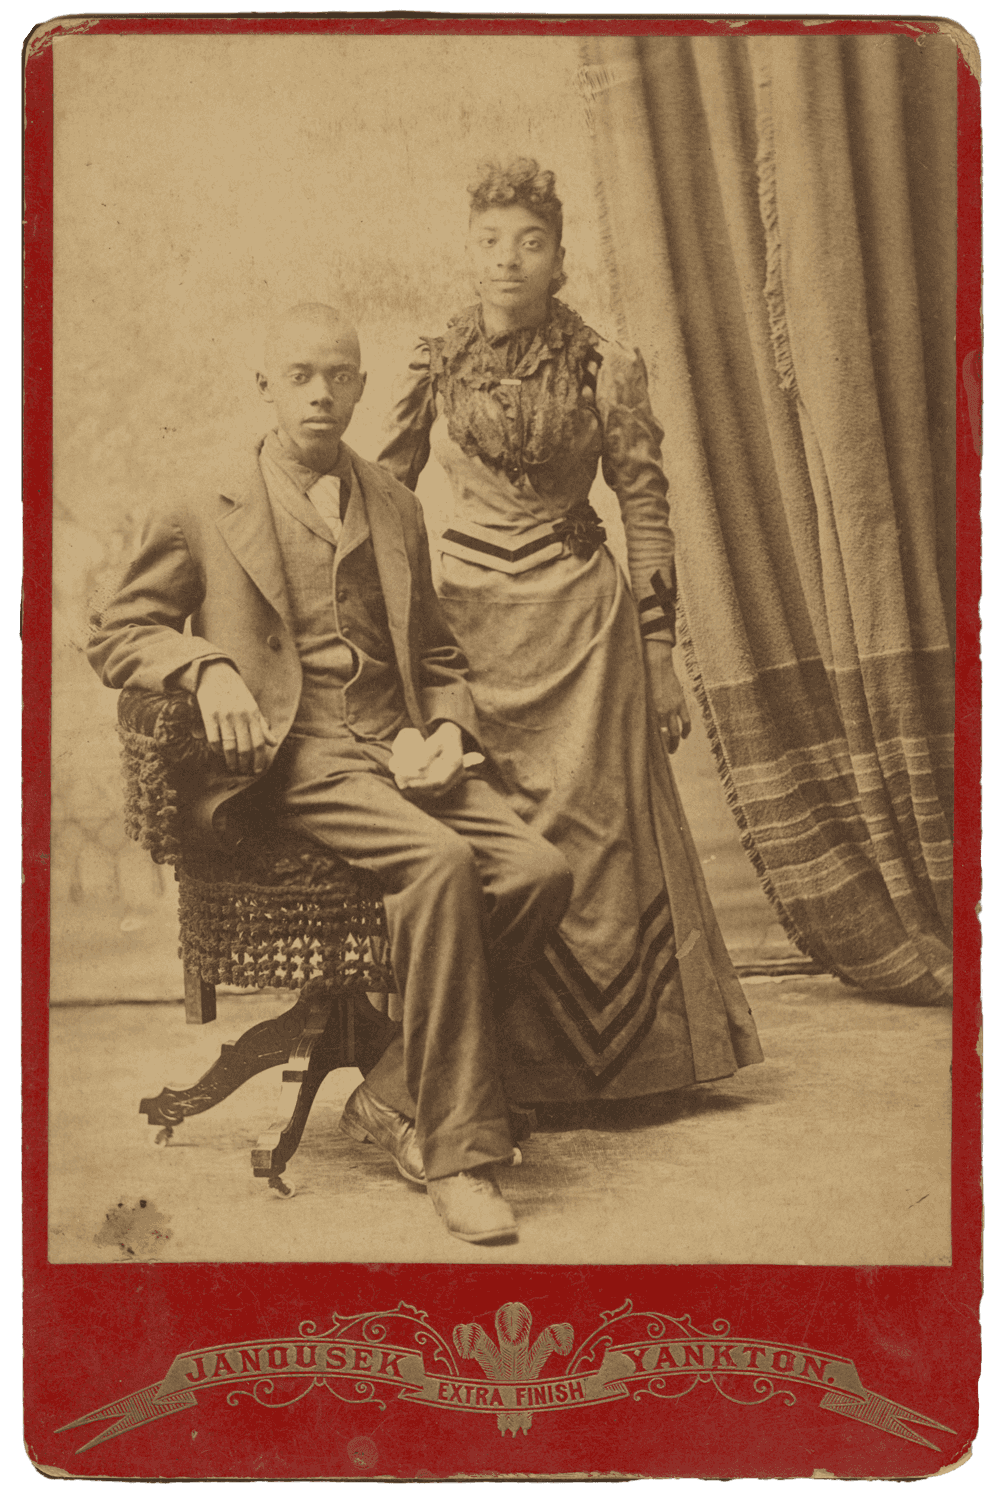 Black and white cabinet card of a man seated with a woman standing next to him.